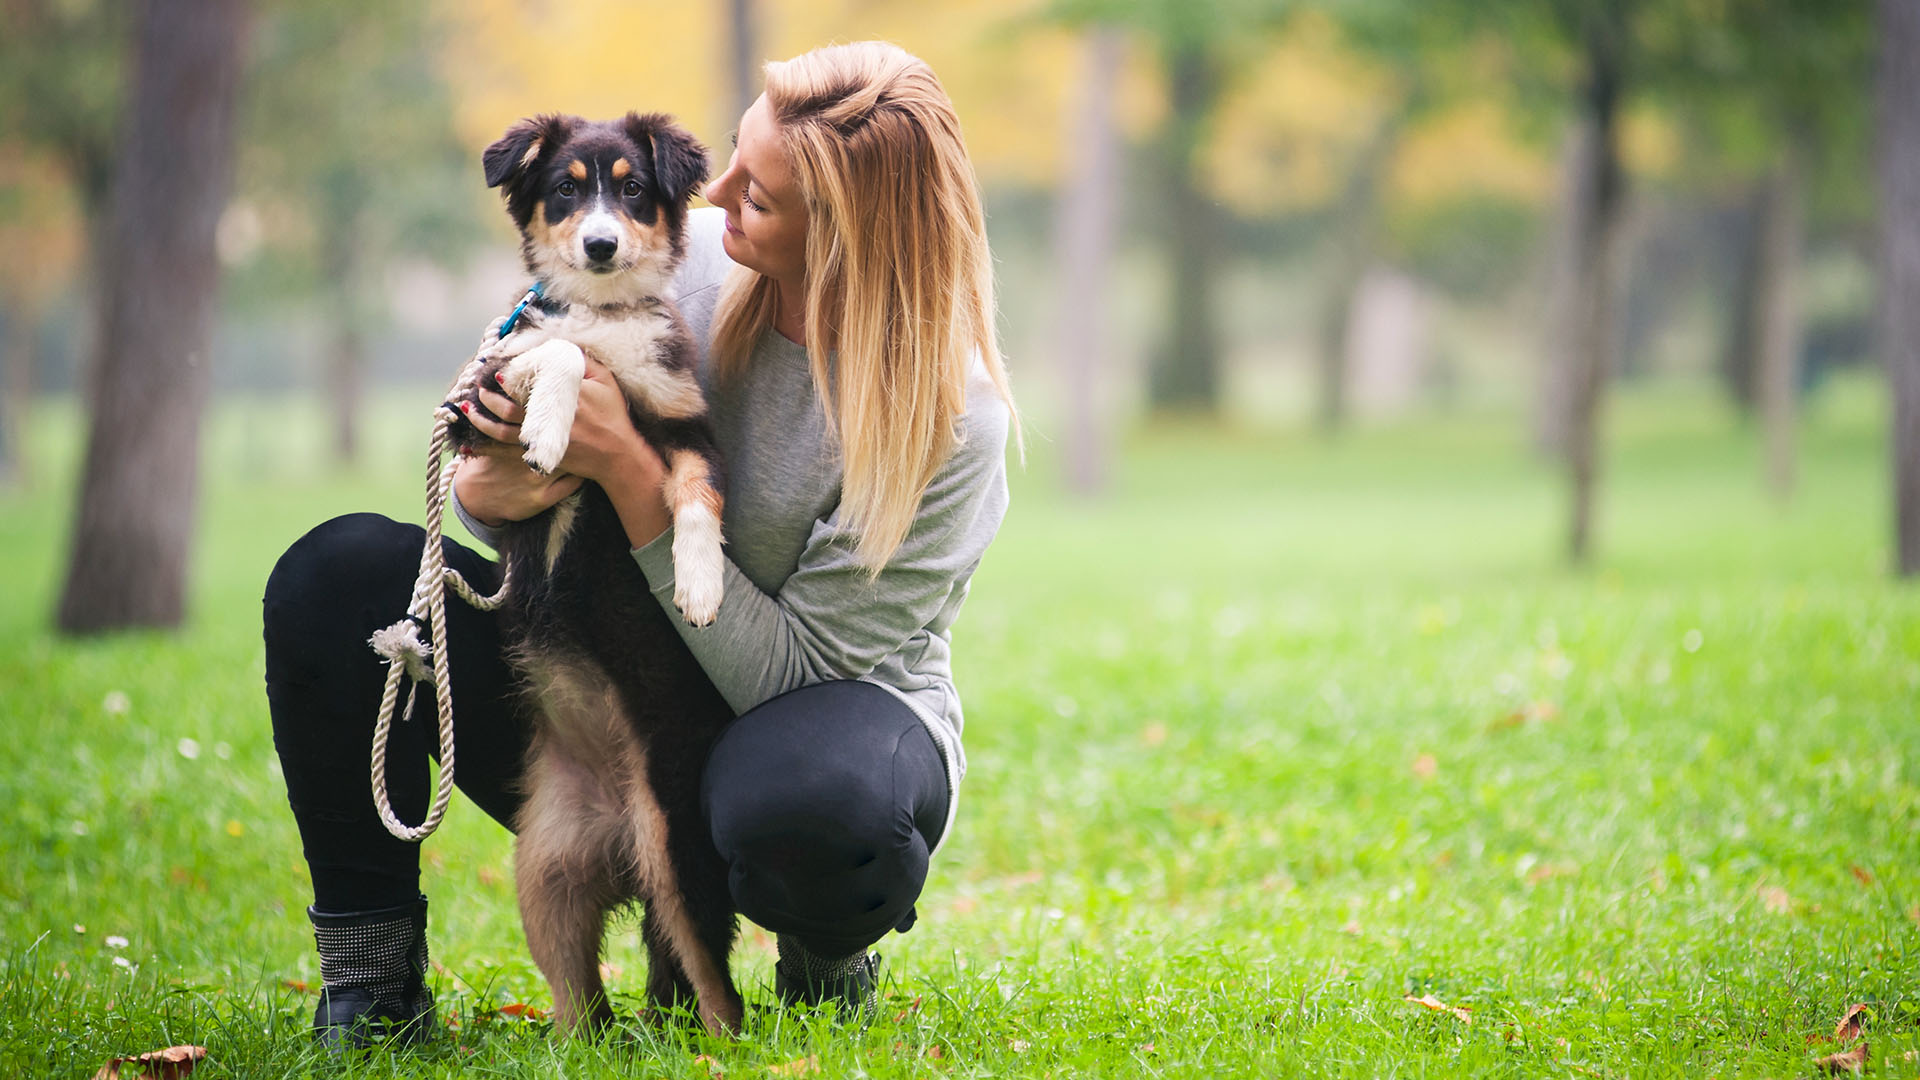 Young woman playing with Australian Shepherd dog outdoors in the park. ; Shutterstock ID 179803604; PO: TODAY.com; Other: Mike Smith